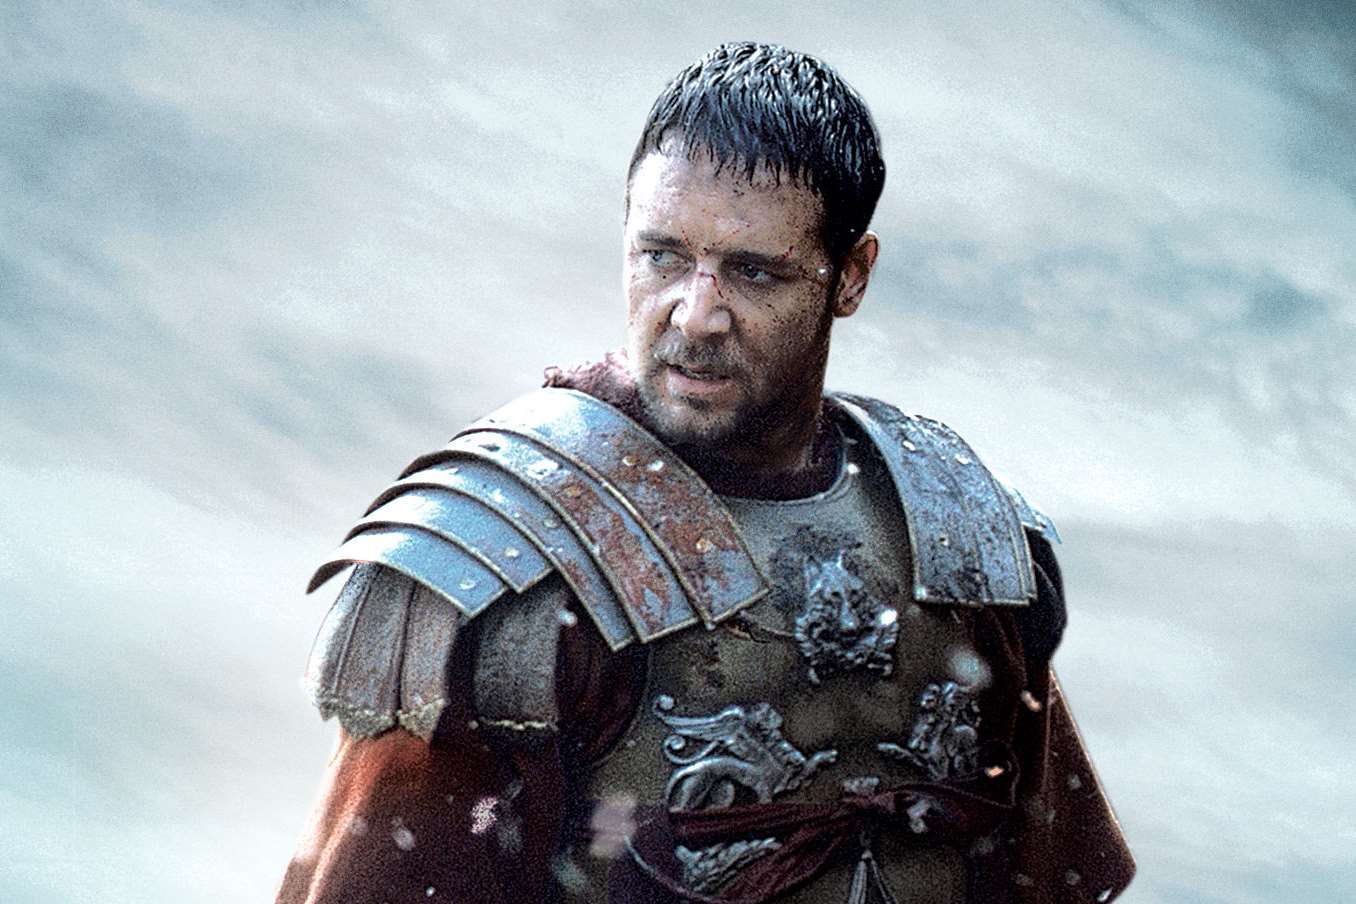 Gladiator star Russell Crowe may have misunderstood Omid's friendly advances